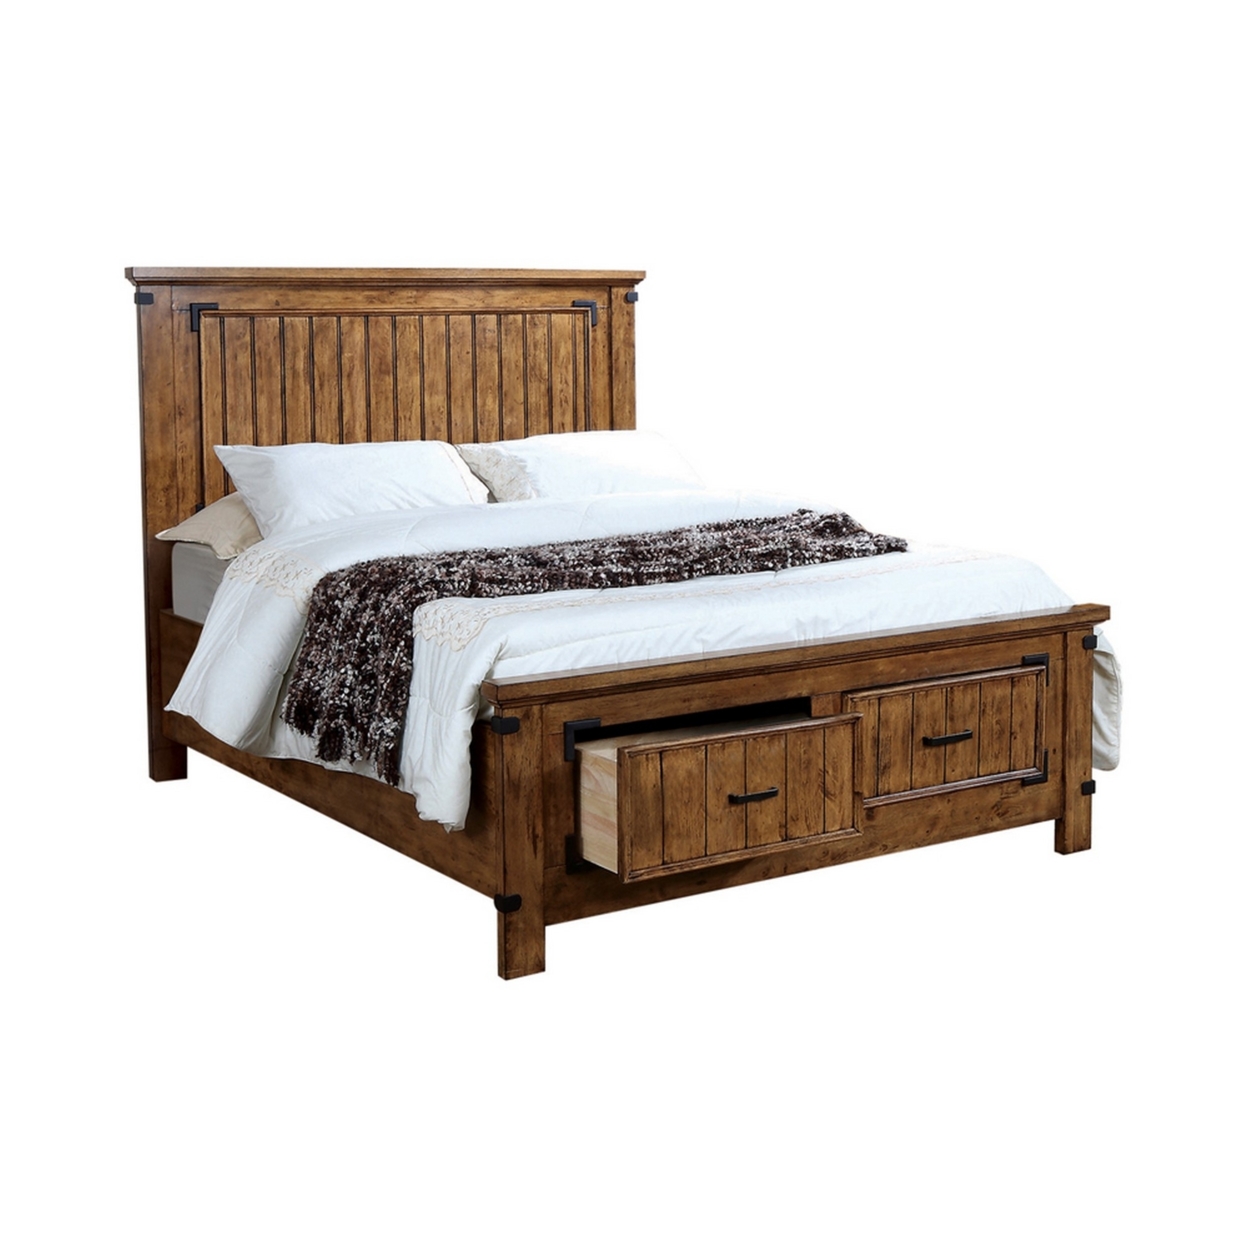 2 Drawers Queen Bed With Plank Detailing And Metal Accents, Brown- Saltoro Sherpi